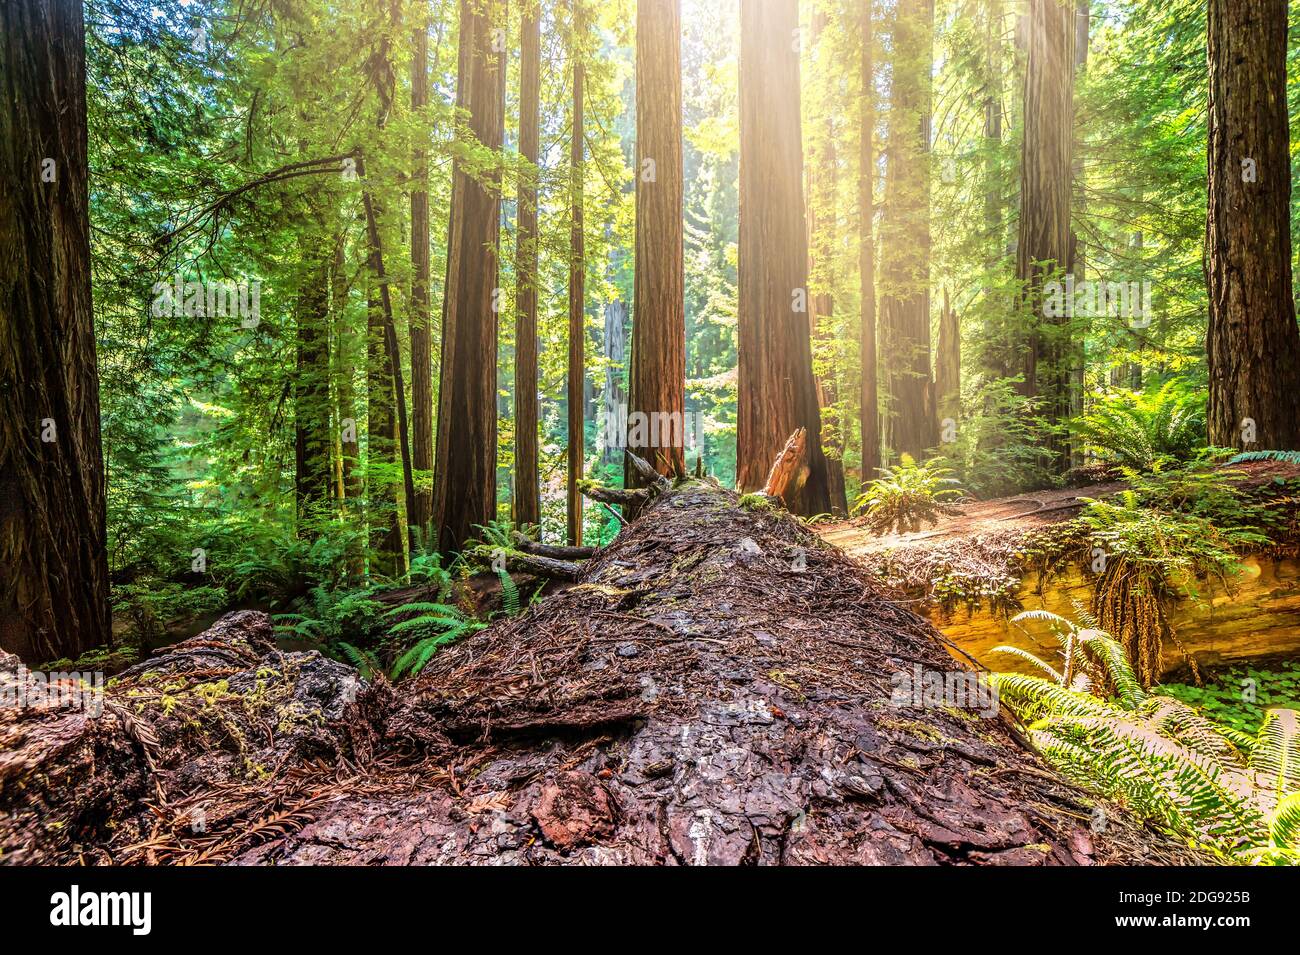 Fallen Redwood Tree in Northern California Forest Stock Photo